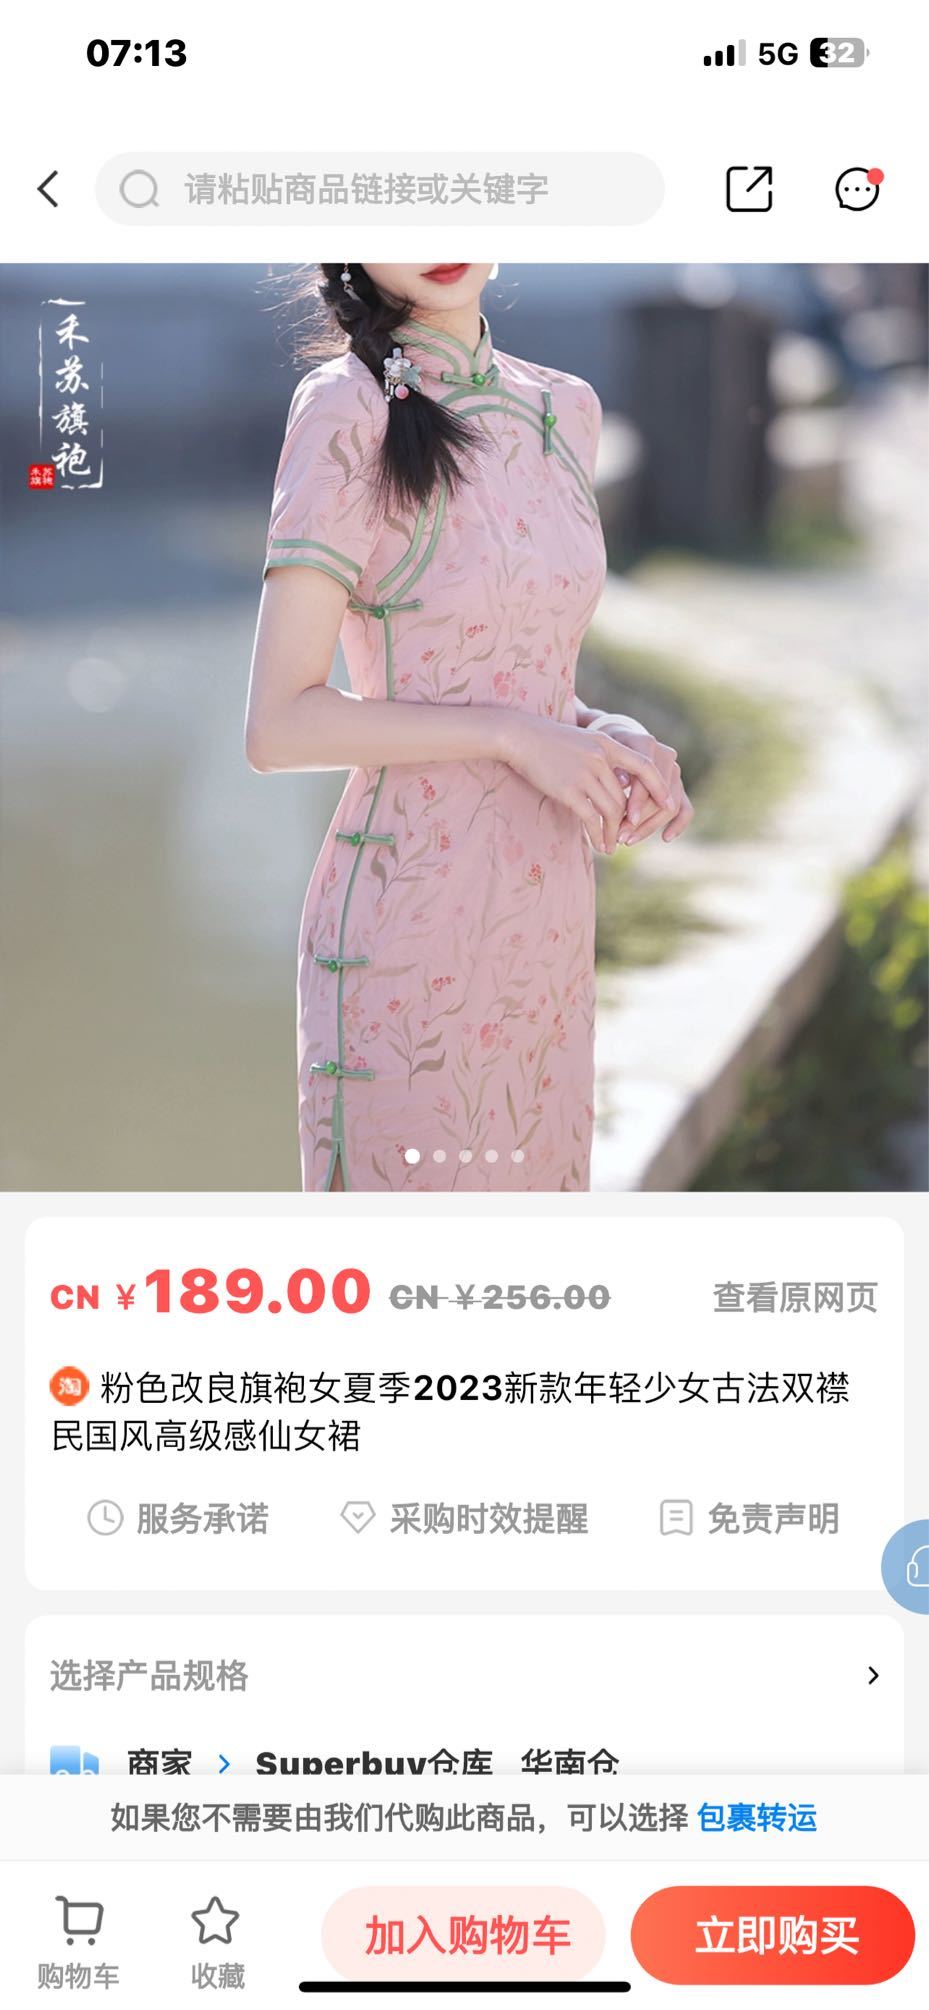 https://img1.superbuy.com/images/consult/2024/04/22/cac6395785c42a6127adf47bf66b3461.jpg?x-oss-process=image/resize,w_950